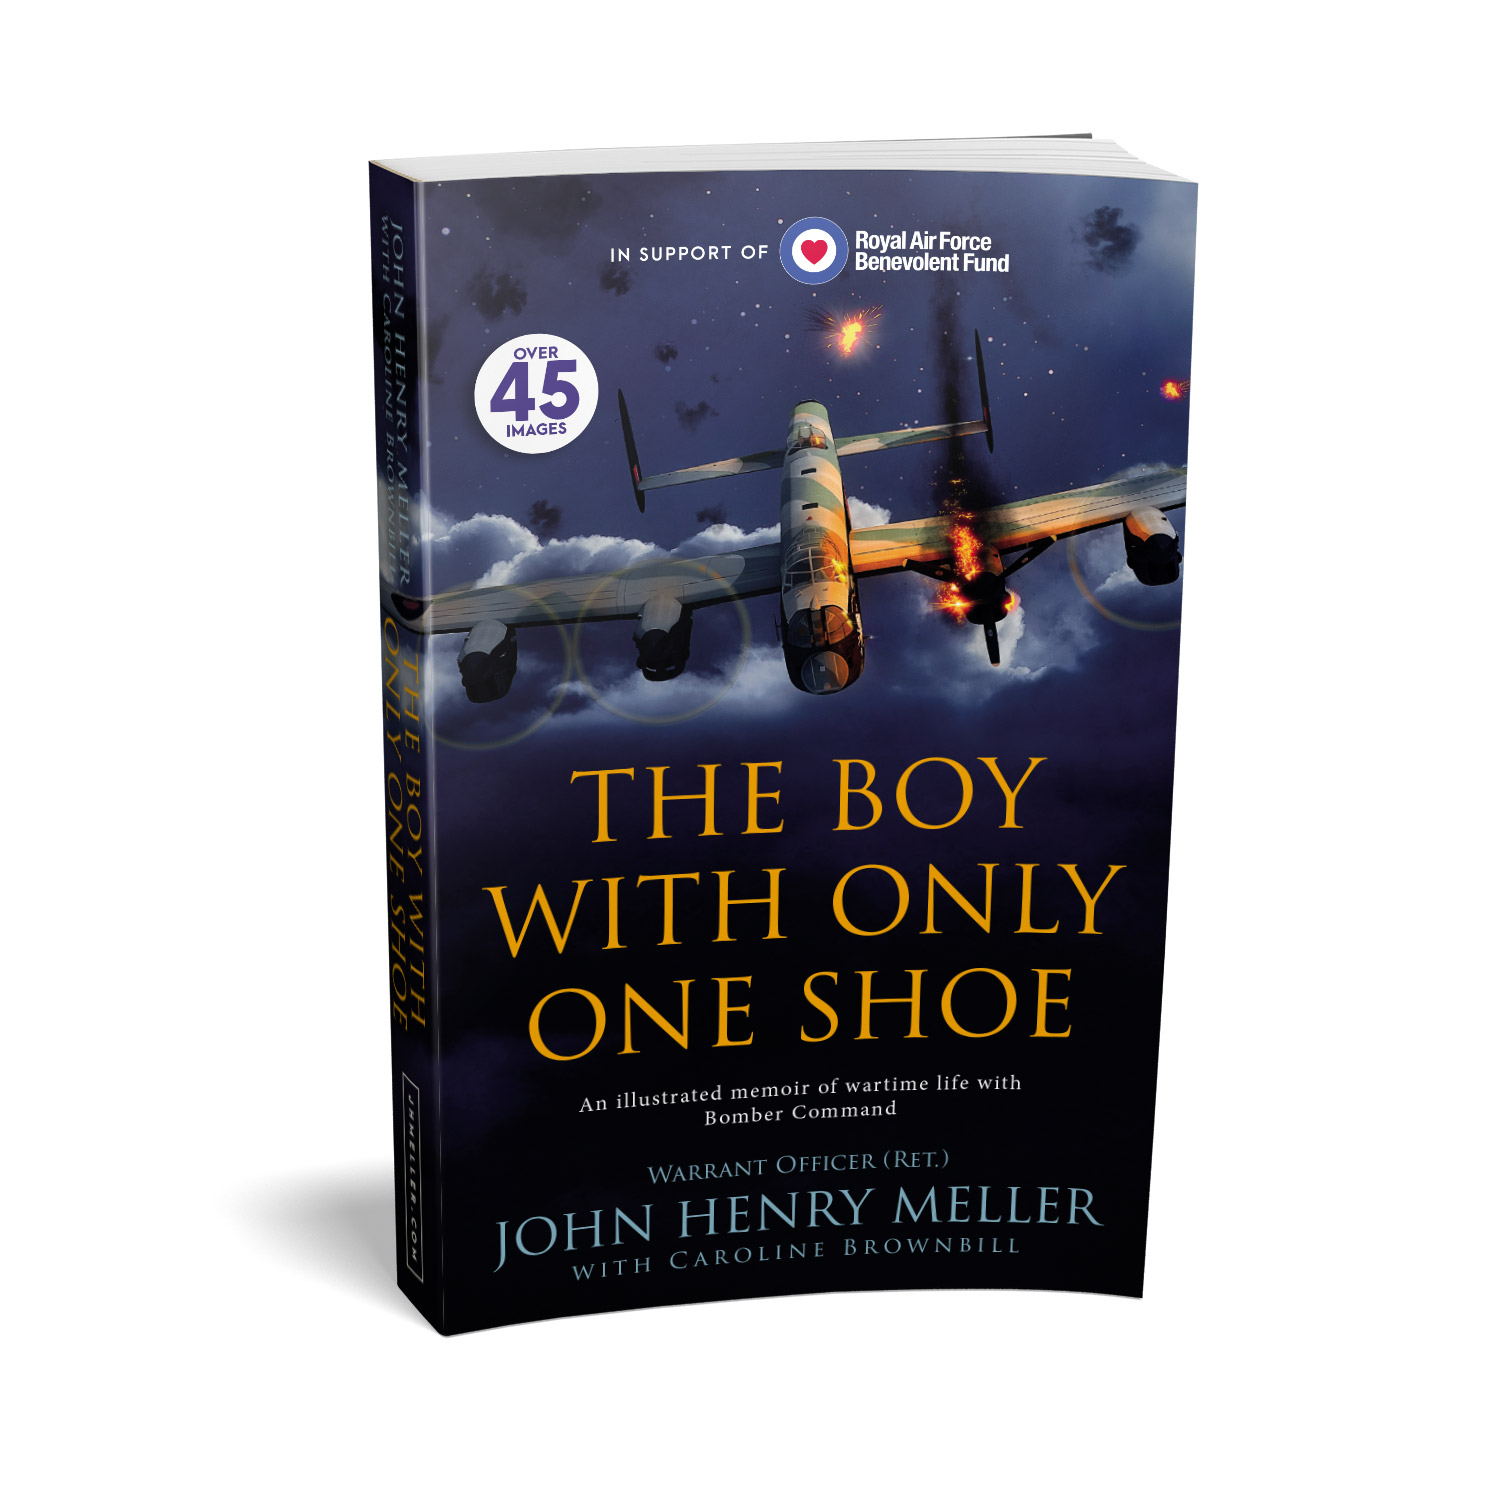 'The Boy With Only One Shoe' is a vivid and affecting memoir of life in RAF Bomber Command during WW2. The authors are John Henry Meller and Caroline Brownbill. The book cover design and interior formatting are by Mark Thomas. To learn more about what Mark could do for your book, please visit coverness.com.